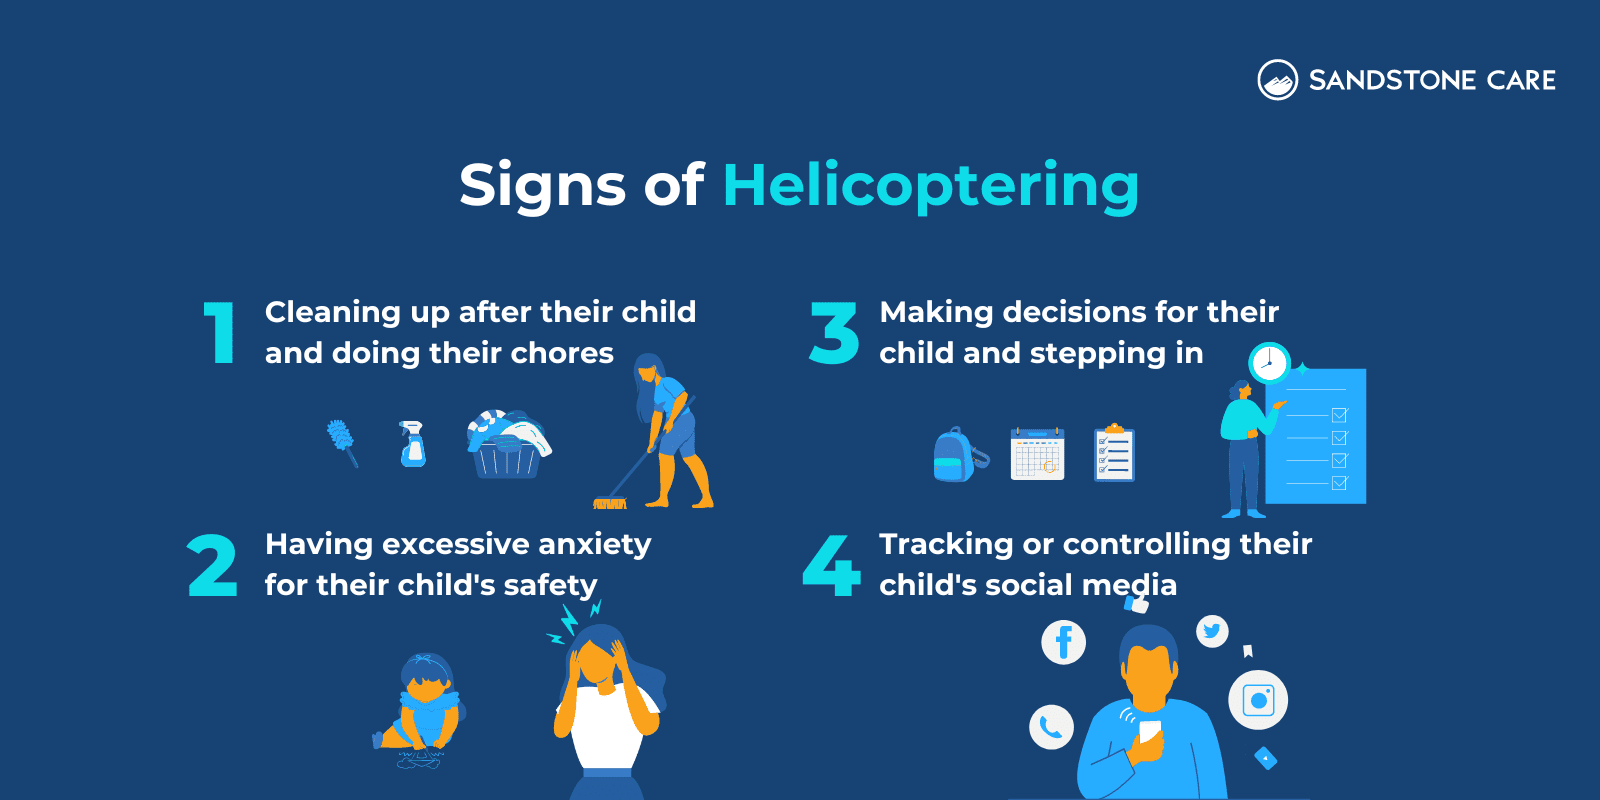 Signs of Helicoptering Infographic (1)